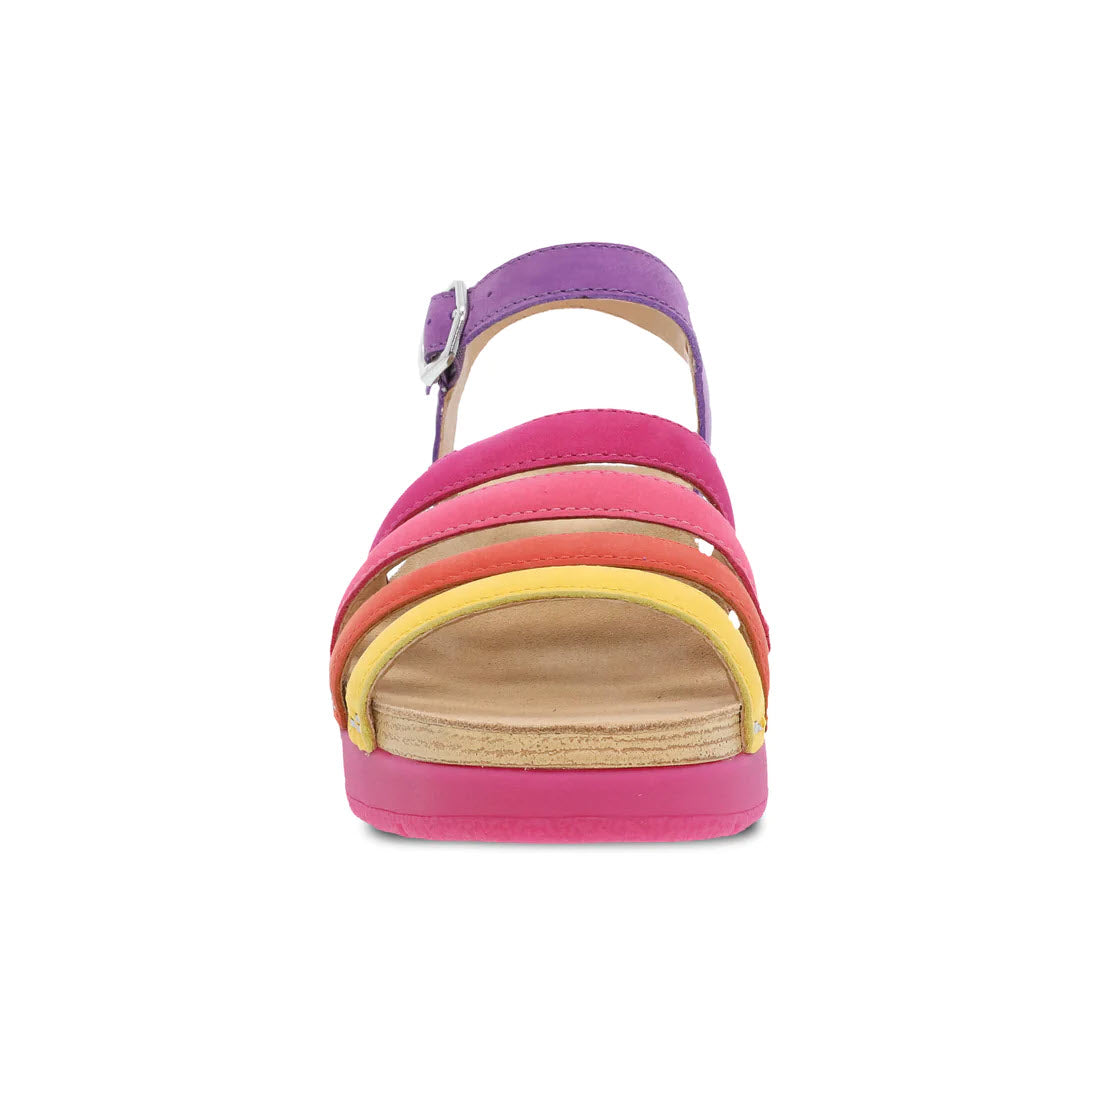 A colorful Dansko Roxie Multi sandal with cute colors including pink, yellow, and orange straps viewed from the back, featuring a purple ankle strap and buckle.